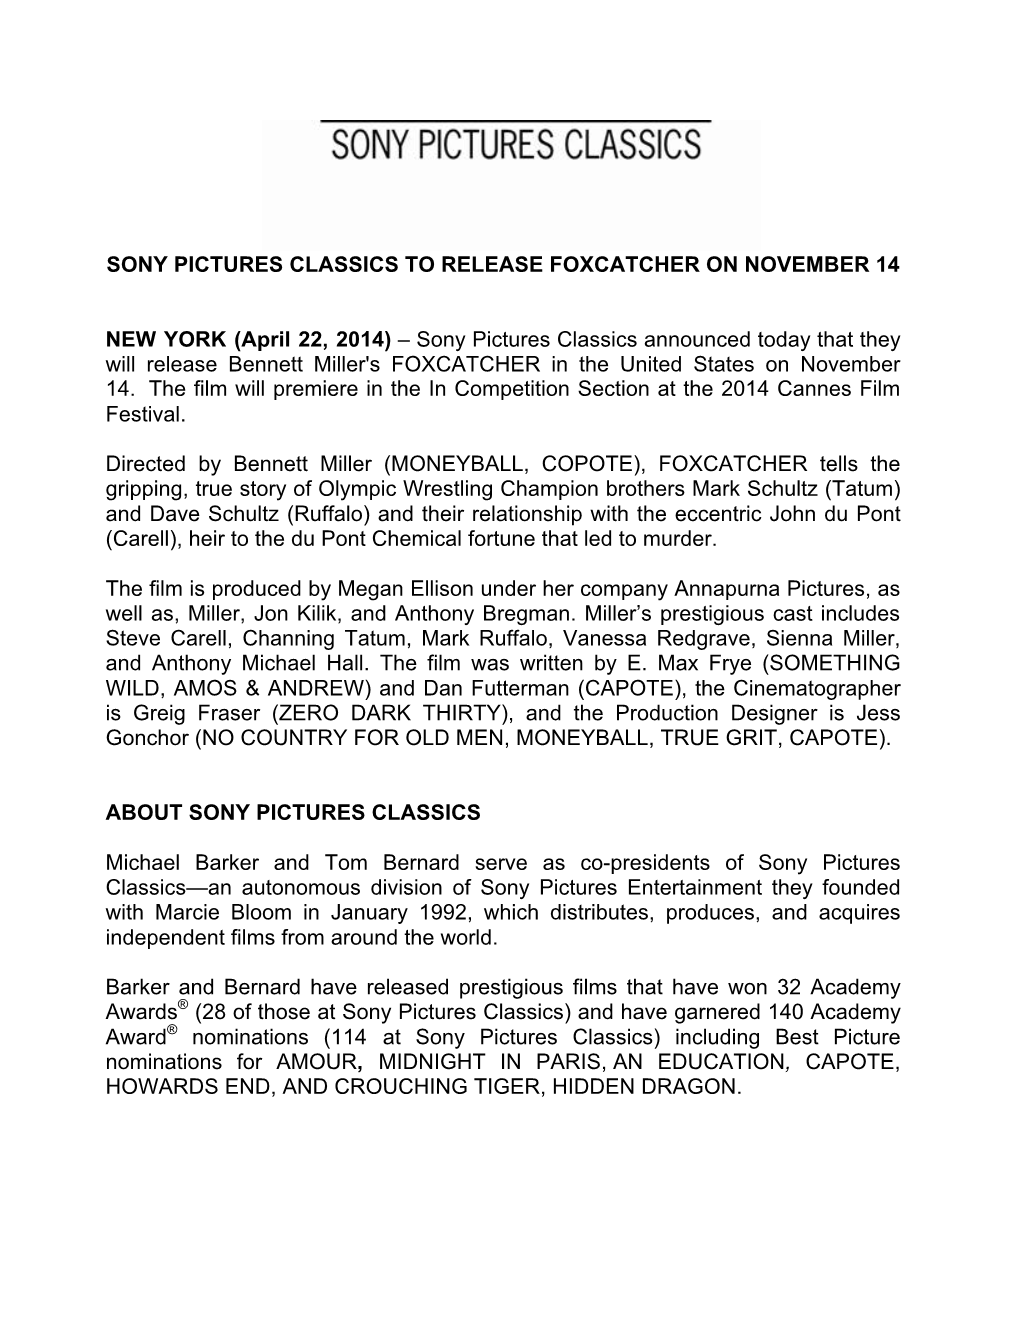 SONY PICTURES CLASSICS to RELEASE FOXCATCHER on NOVEMBER 14 NEW YORK (April 22, 2014) – Sony Pictures Classics Announced Today